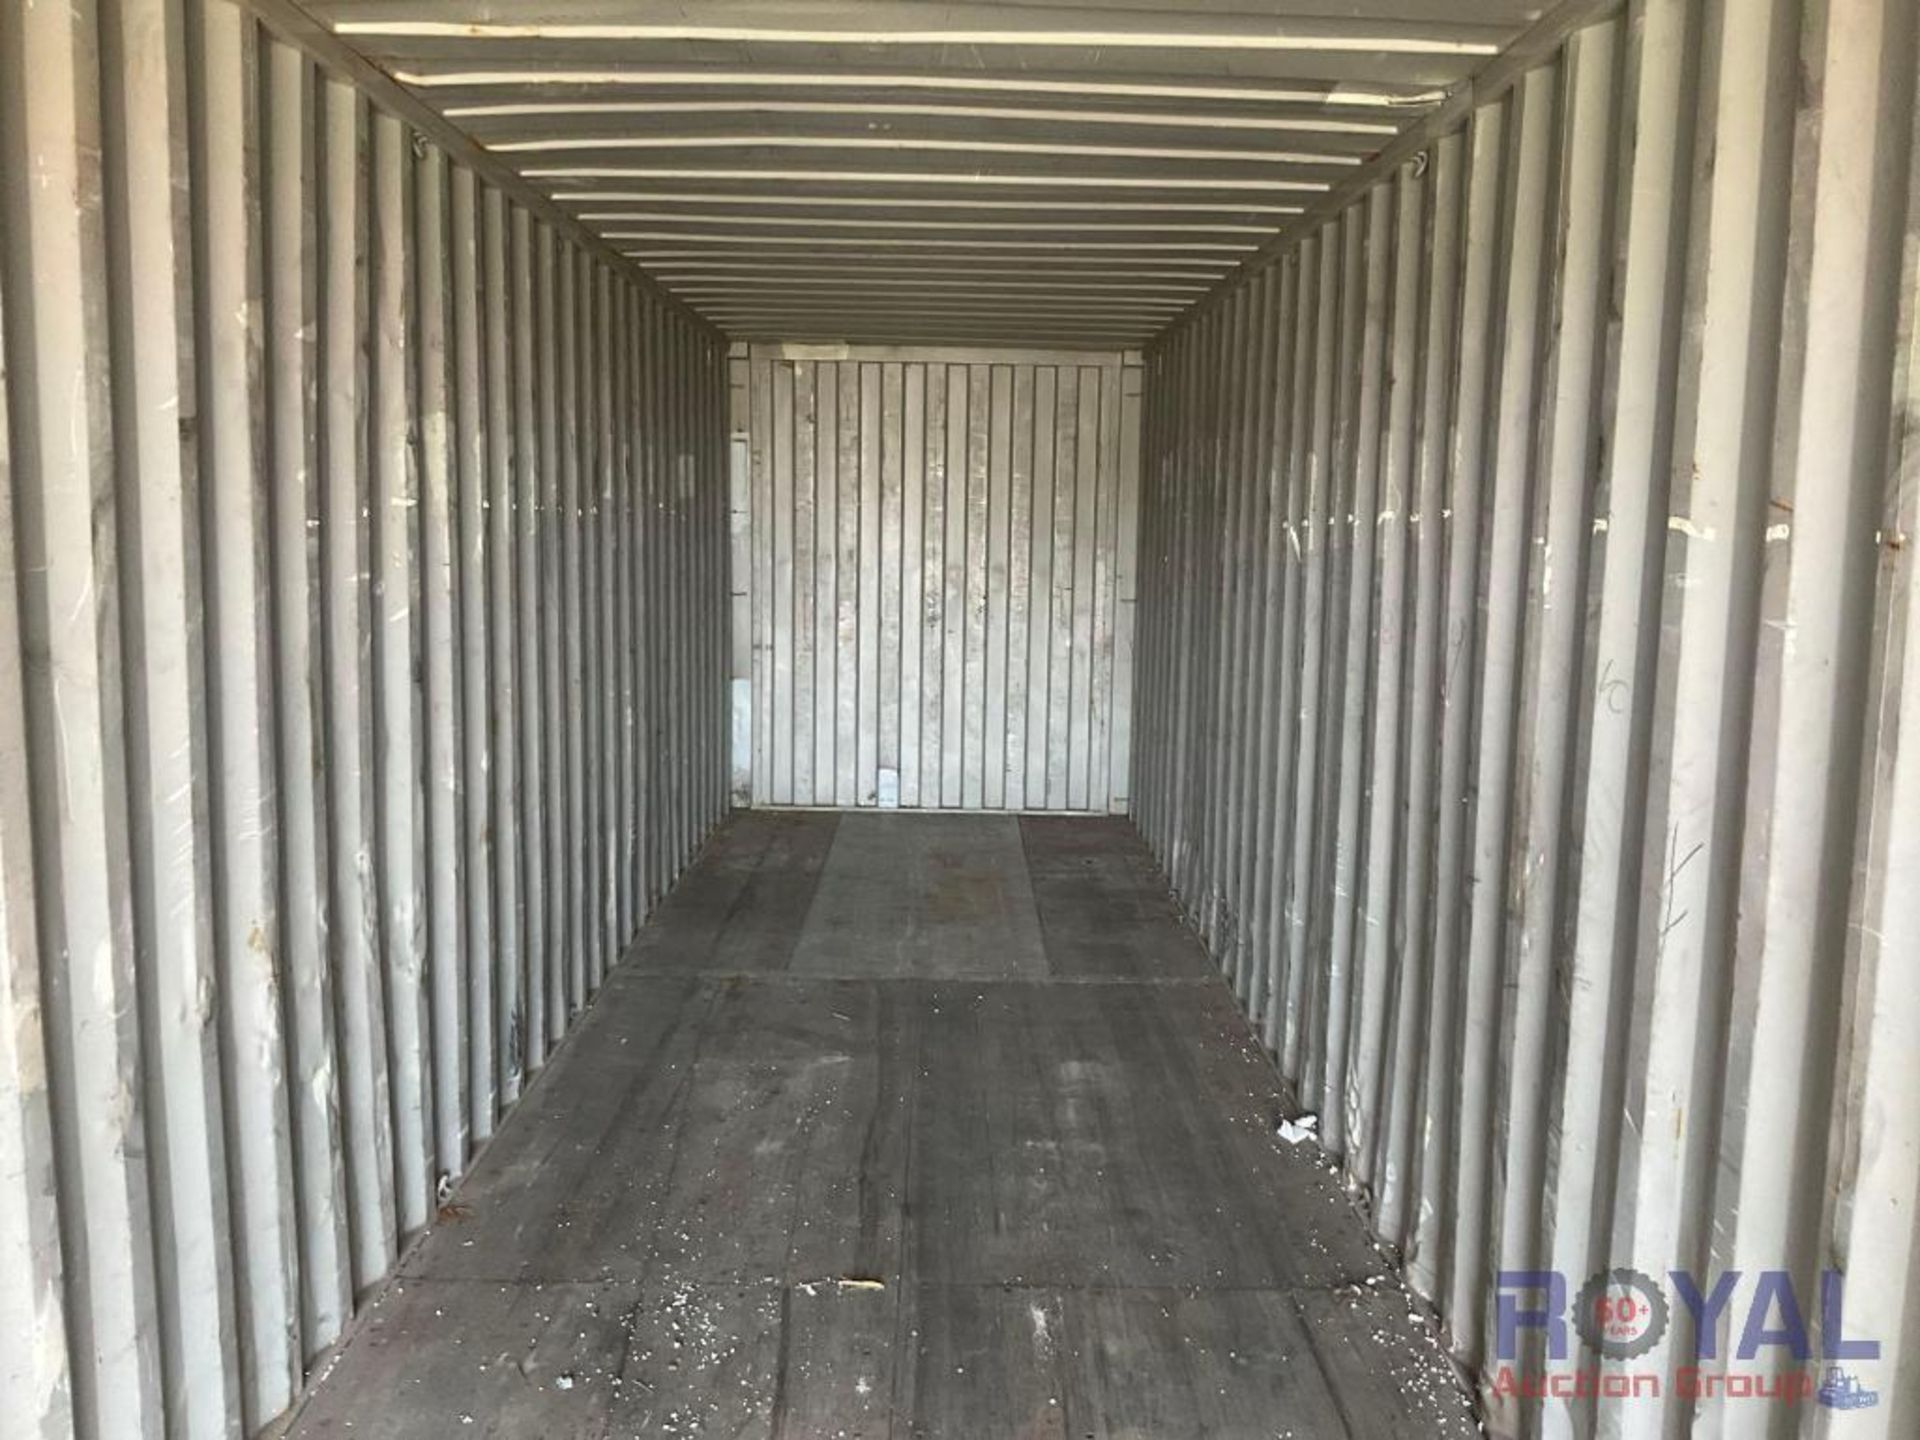 Used 40ft Shipping Container - Image 7 of 7